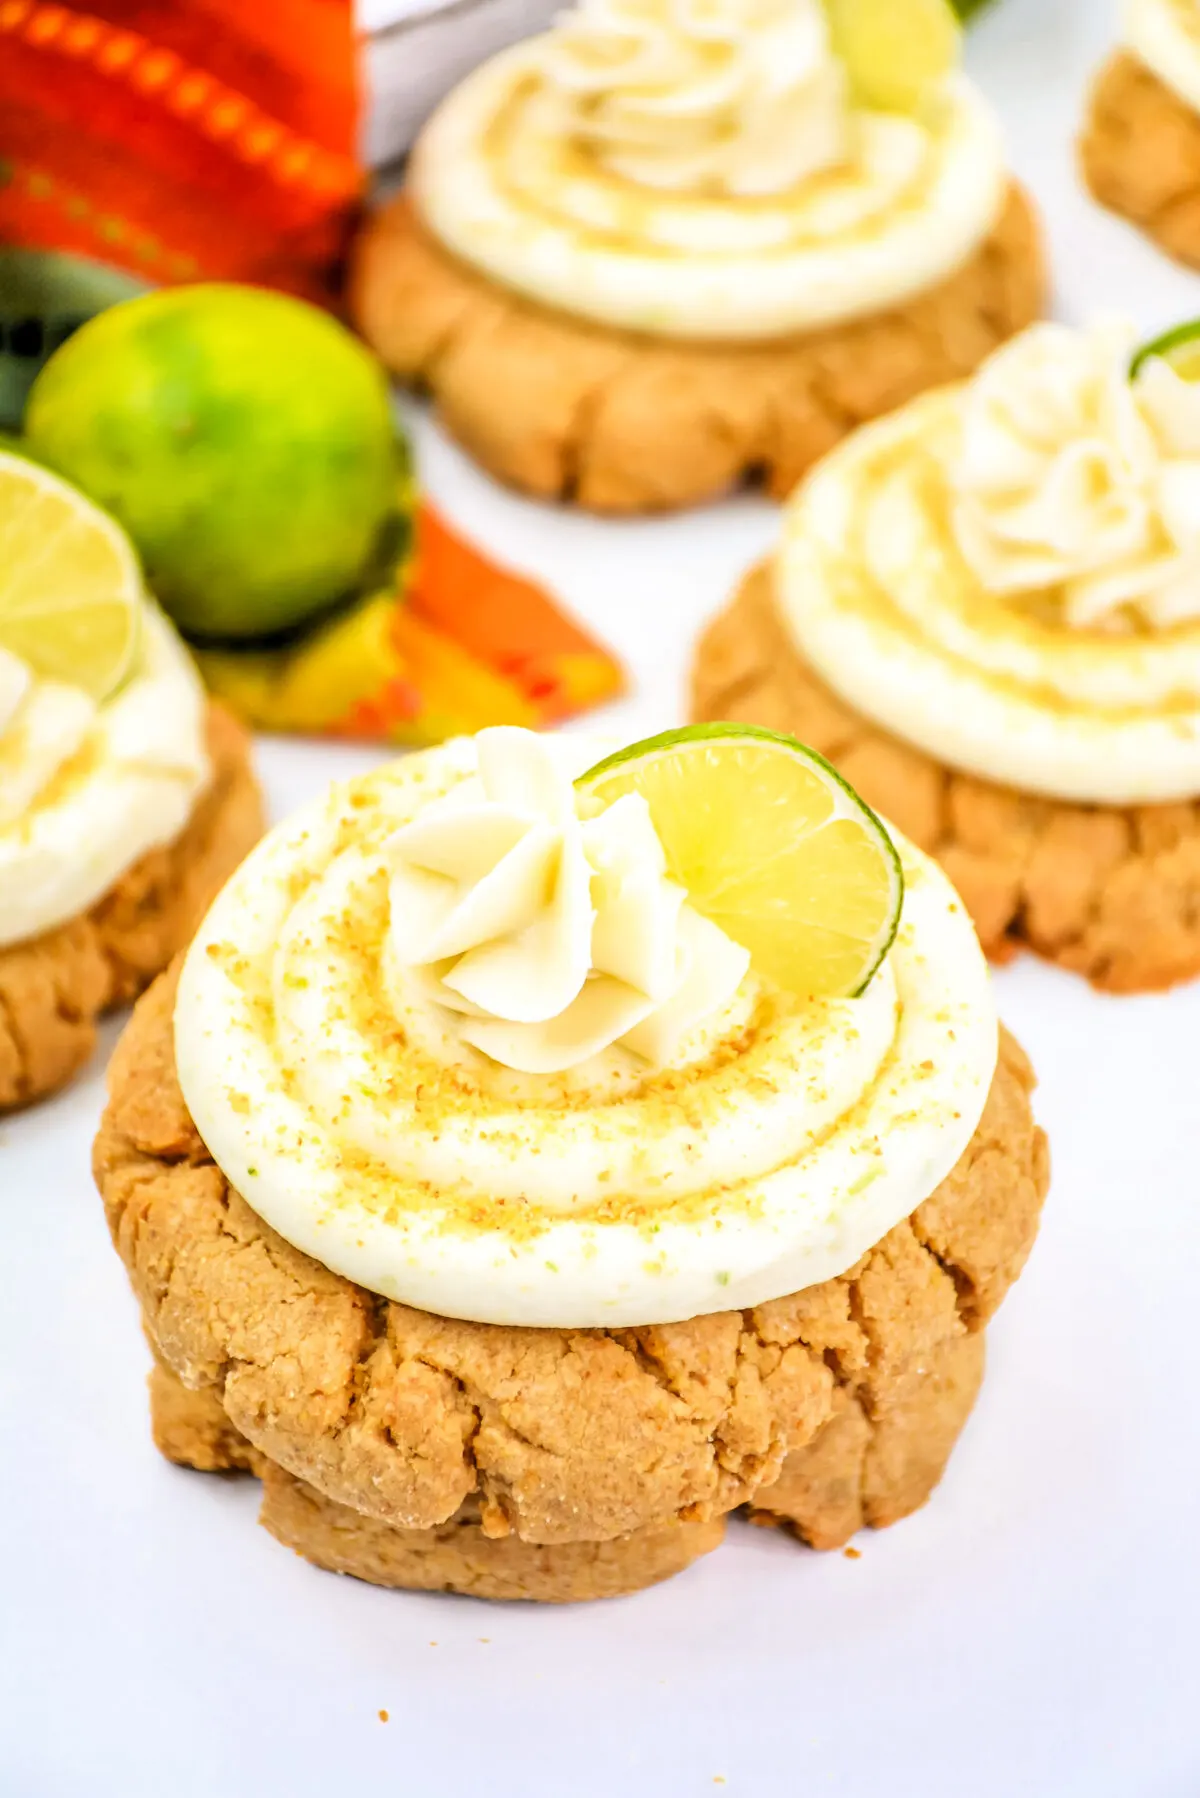 Love key lime pie? This Crumbl key lime cookie recipe is the perfect way to get your fix. Tart key lime frosting tops a tender graham cookie.